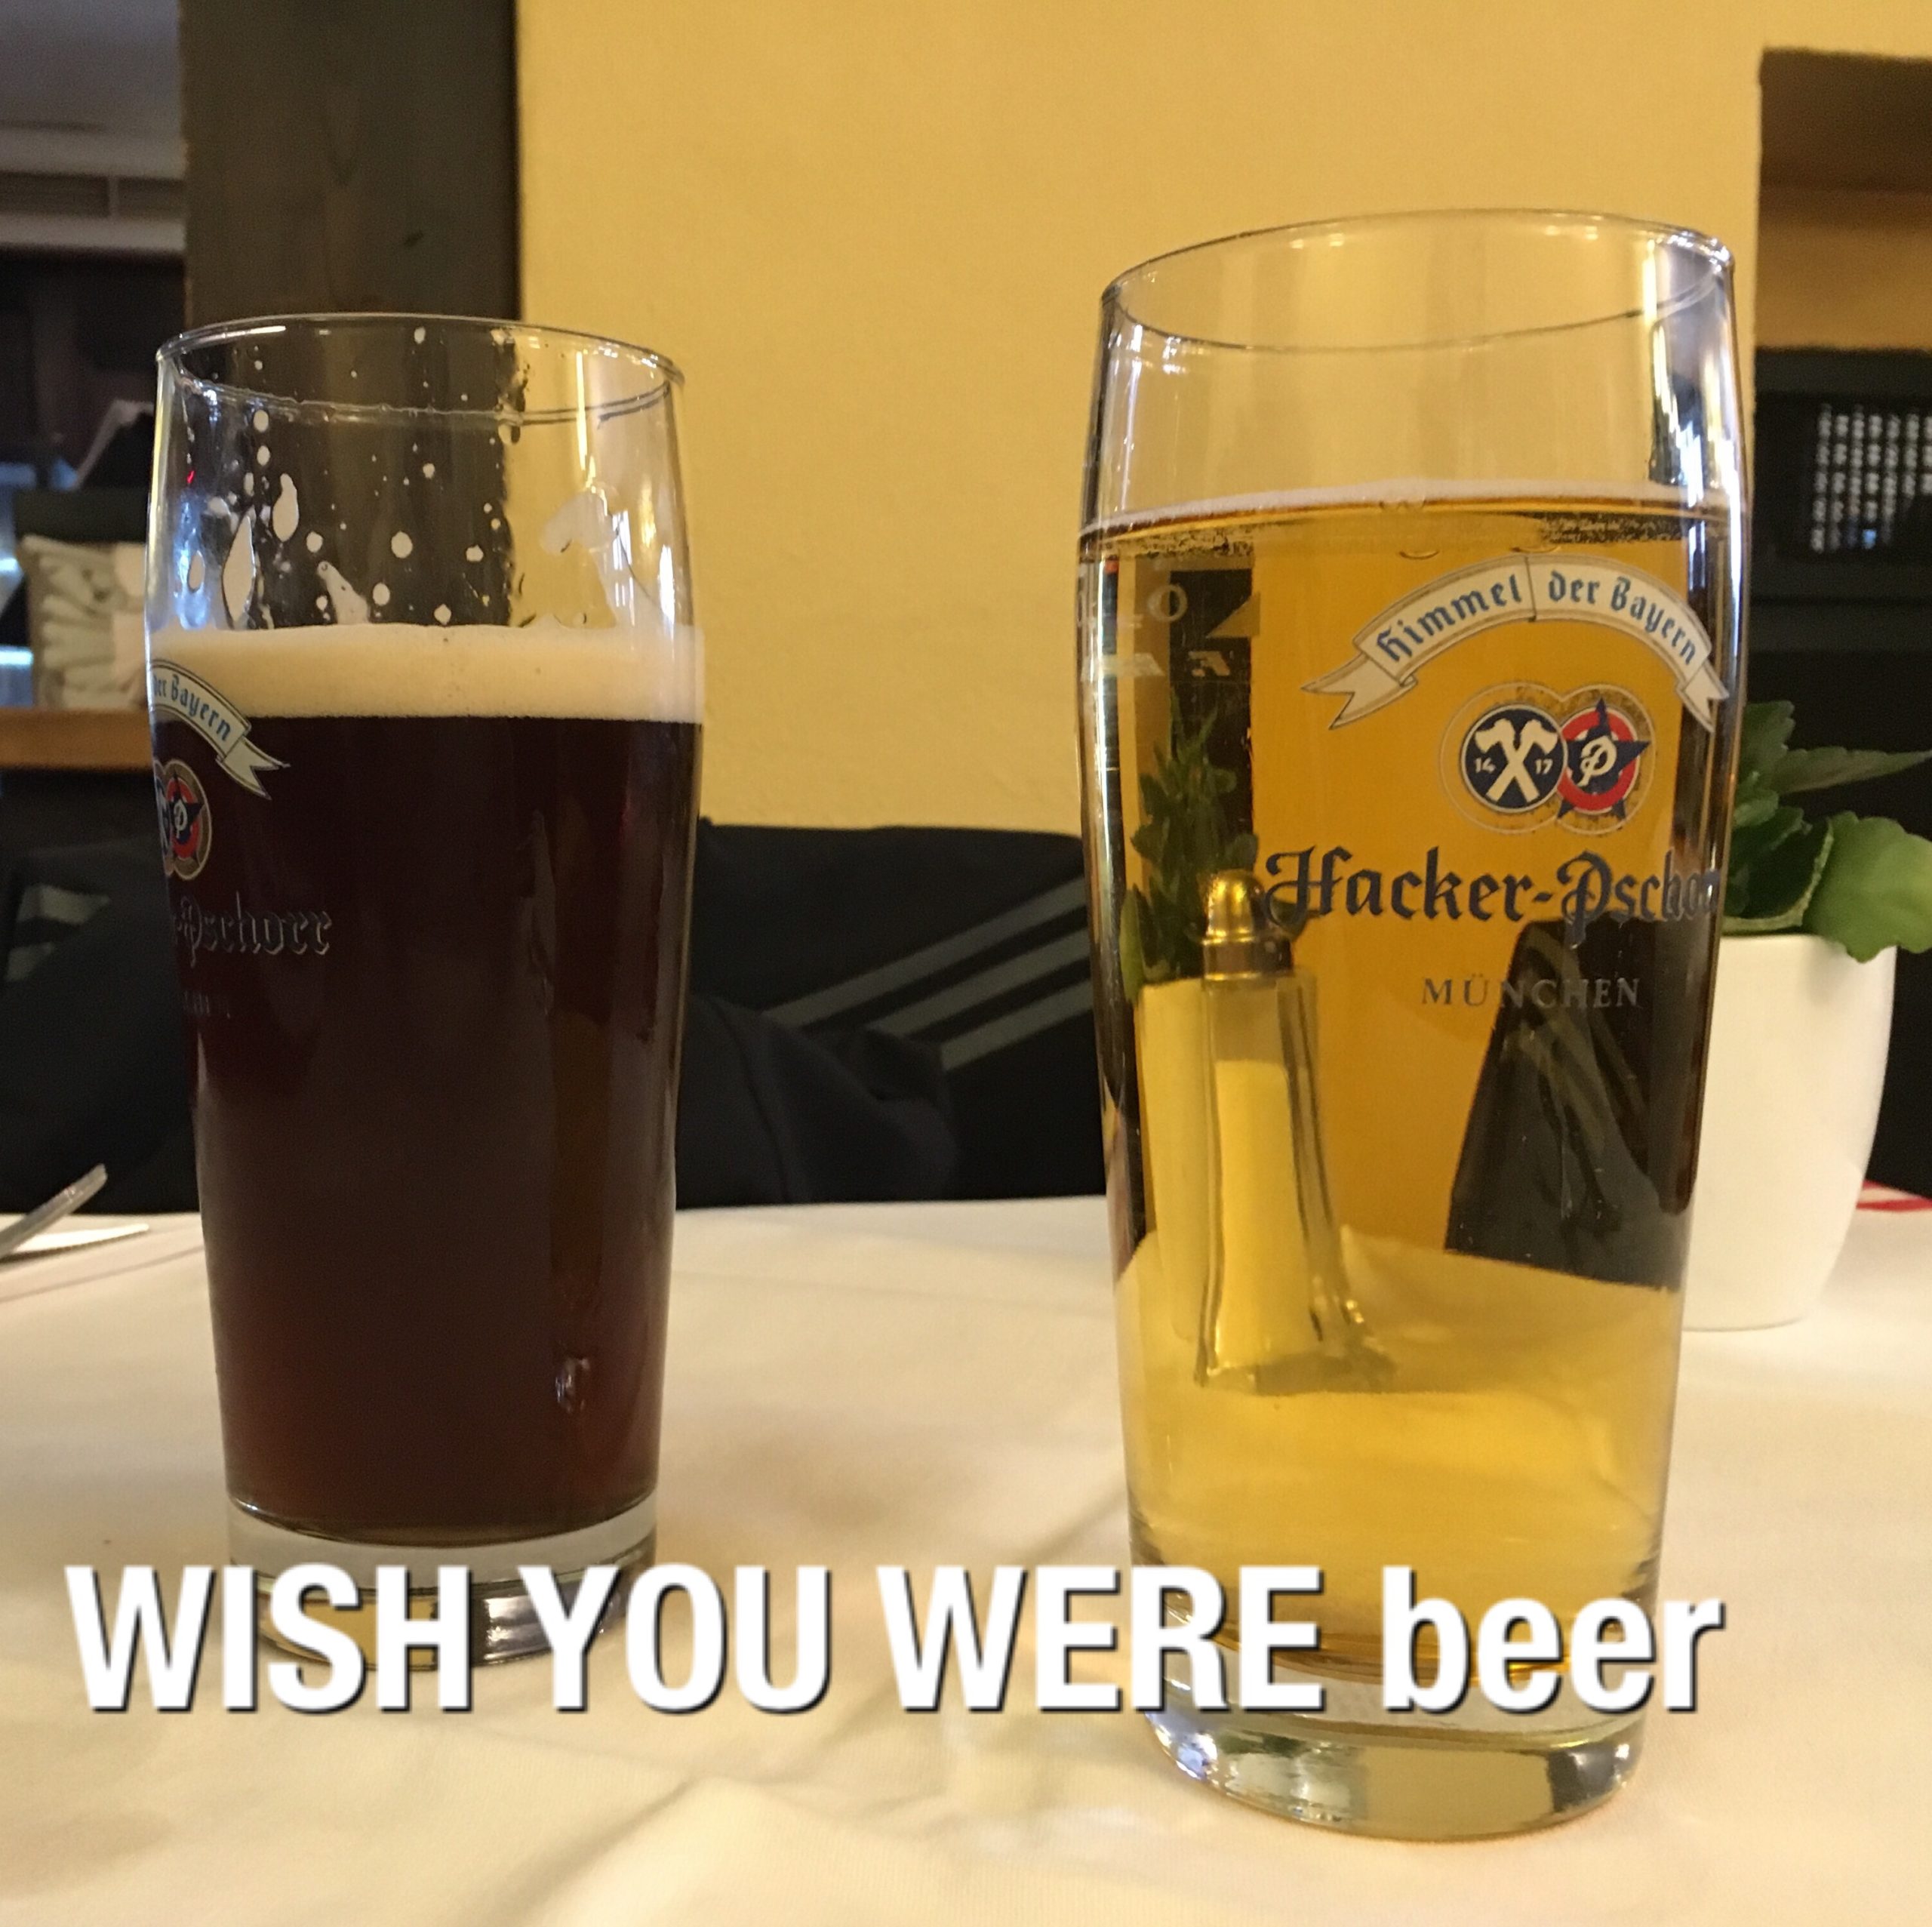 Wish you where beer